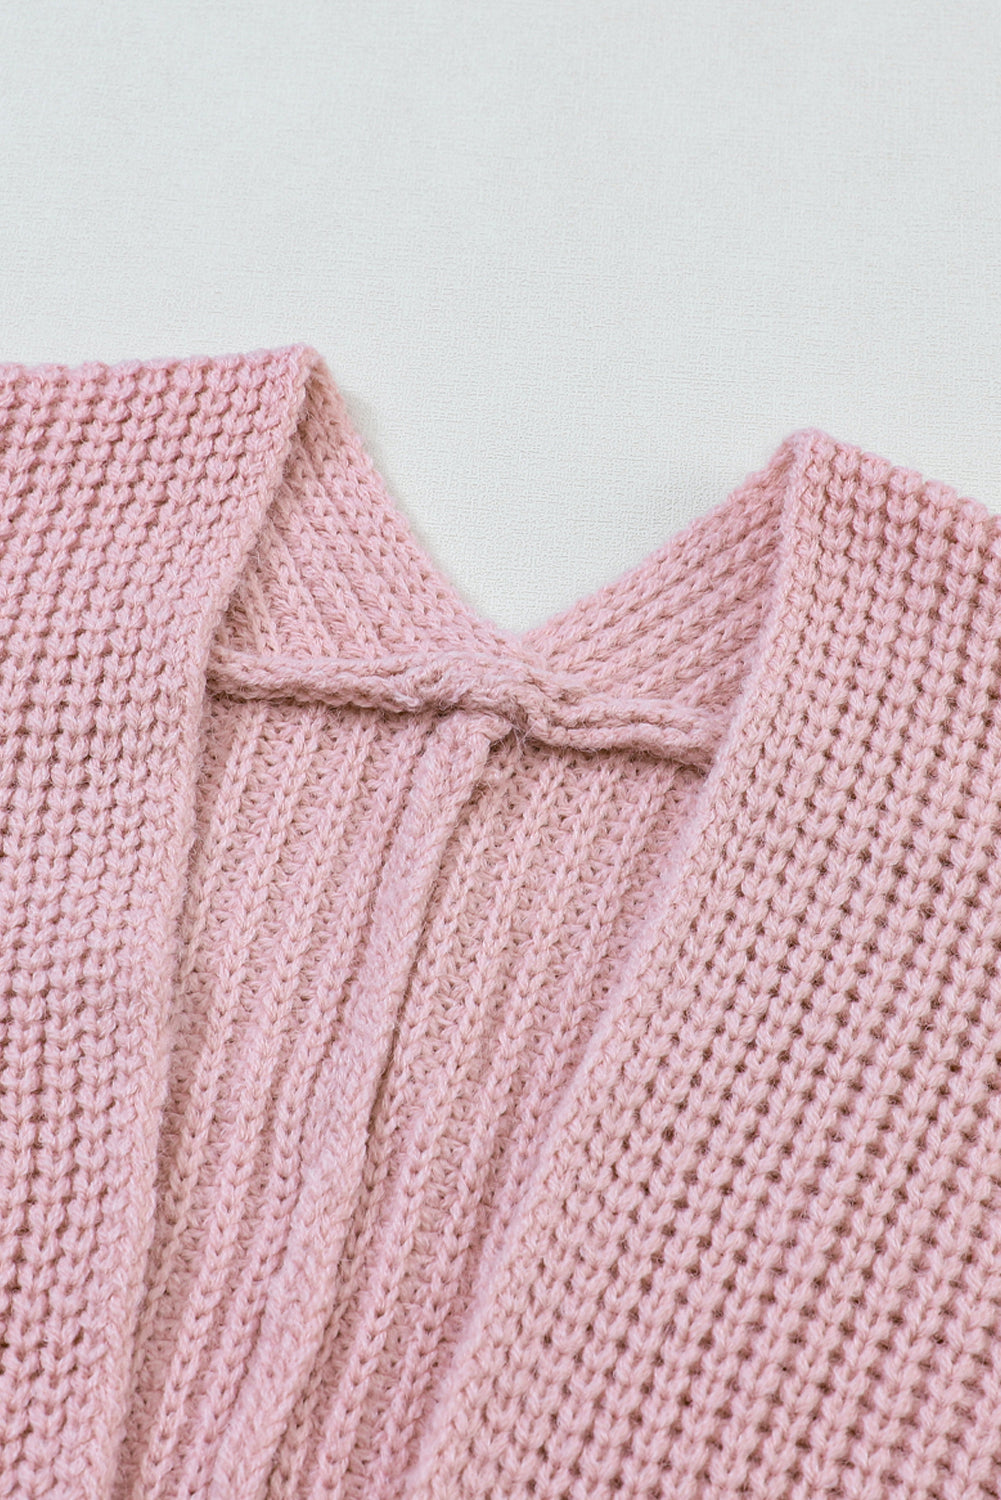 Make it a double Cardigan